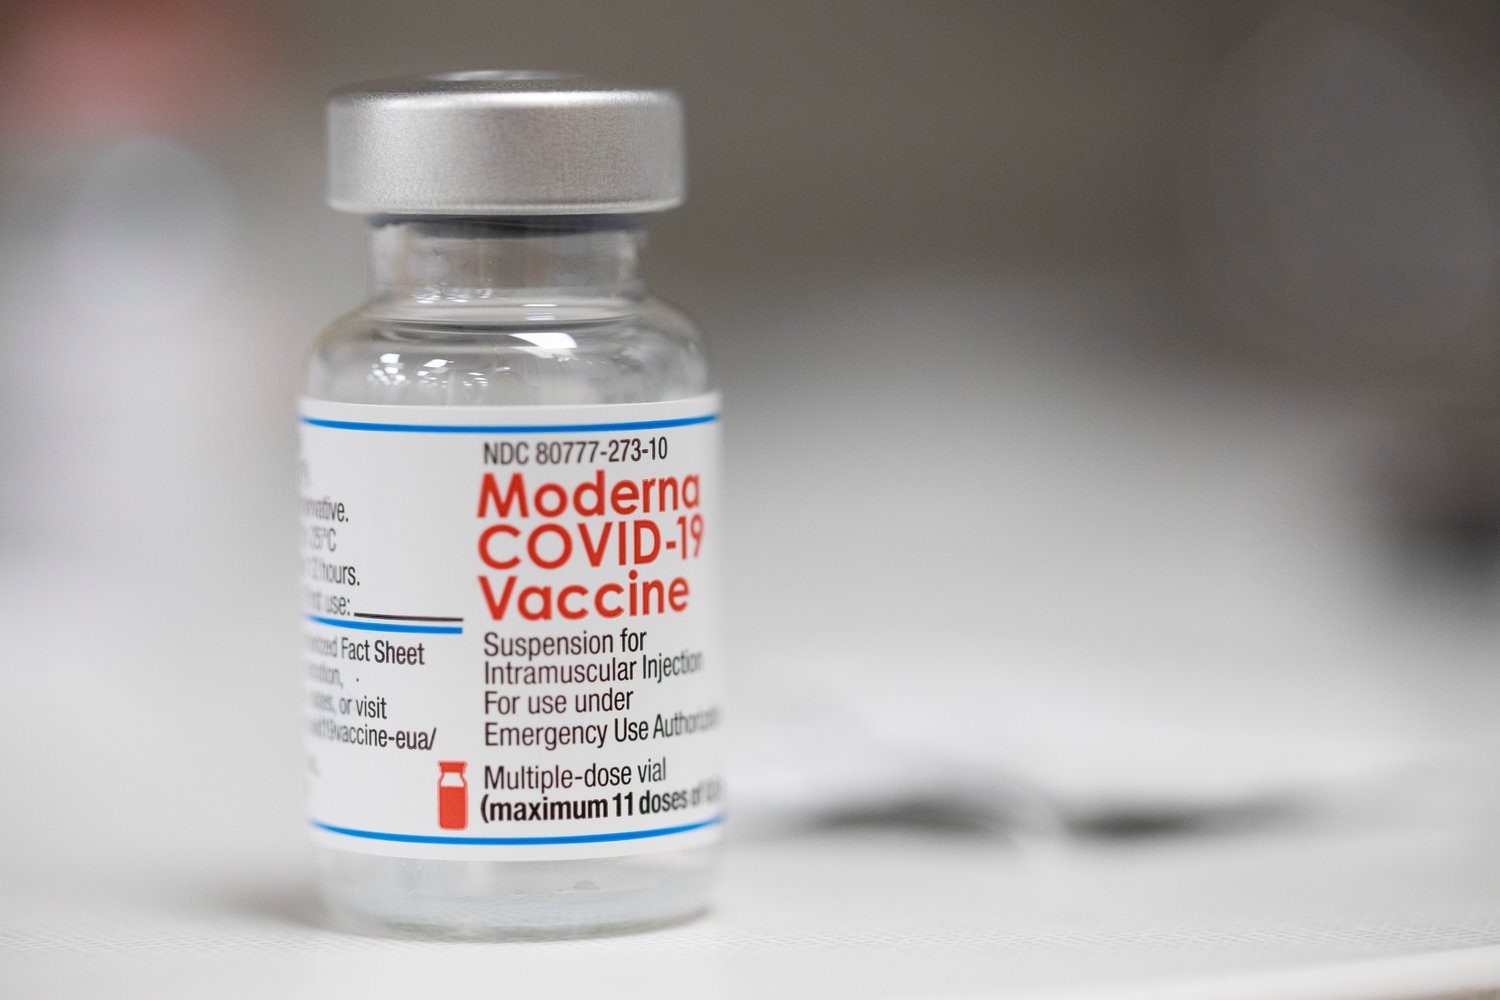 FILE - A vial of the Moderna COVID-19 vaccine is displayed on a counter at a pharmacy in Portland, Ore. on Dec. 27, 2021. U.S. health authorities are facing a critical decision: whether to offer COVID-19 booster shots this fall that better match the omicron variant even though the coronavirus already has spawned still more mutants. Moderna and Pfizer are testing updated booster candidates, and advisers to the U.S. Food and Drug Administration will debate Tuesday, June 28, 2022, if it‚Äôs time for a switch, setting the stage for similar moves by other countries. (AP Photo/Jenny Kane, File)